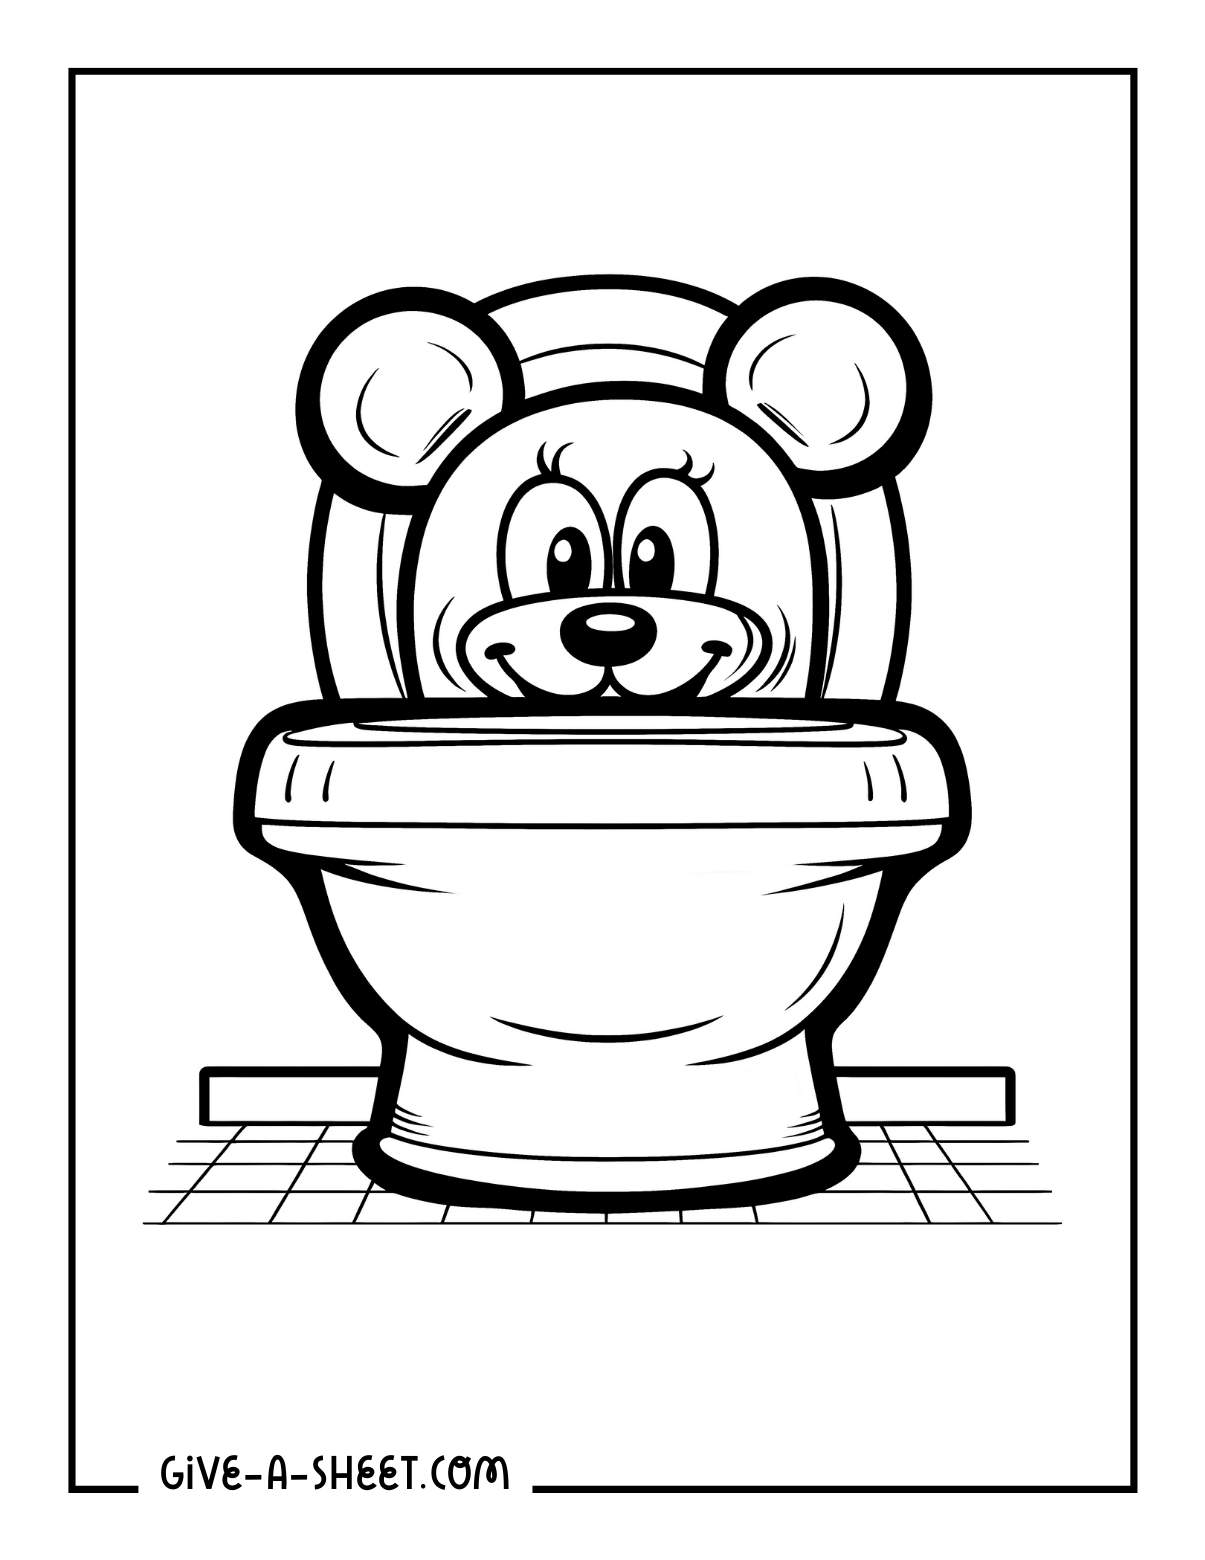 Cute potty seat coloring page for kids.